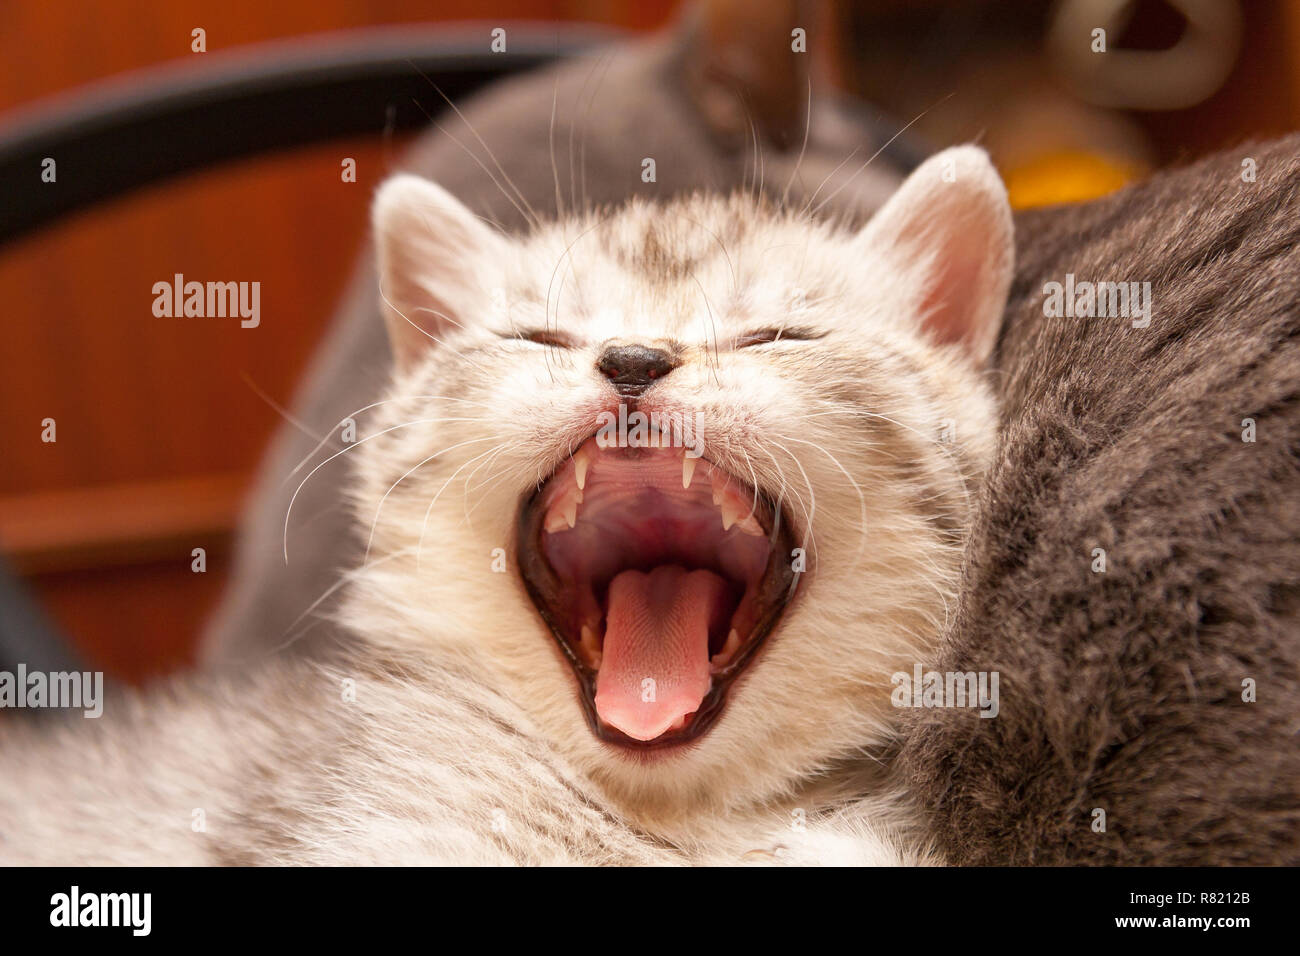 British kitten yawns wide open his mouth. Cat's mouth, tongue and teeth. Stock Photo